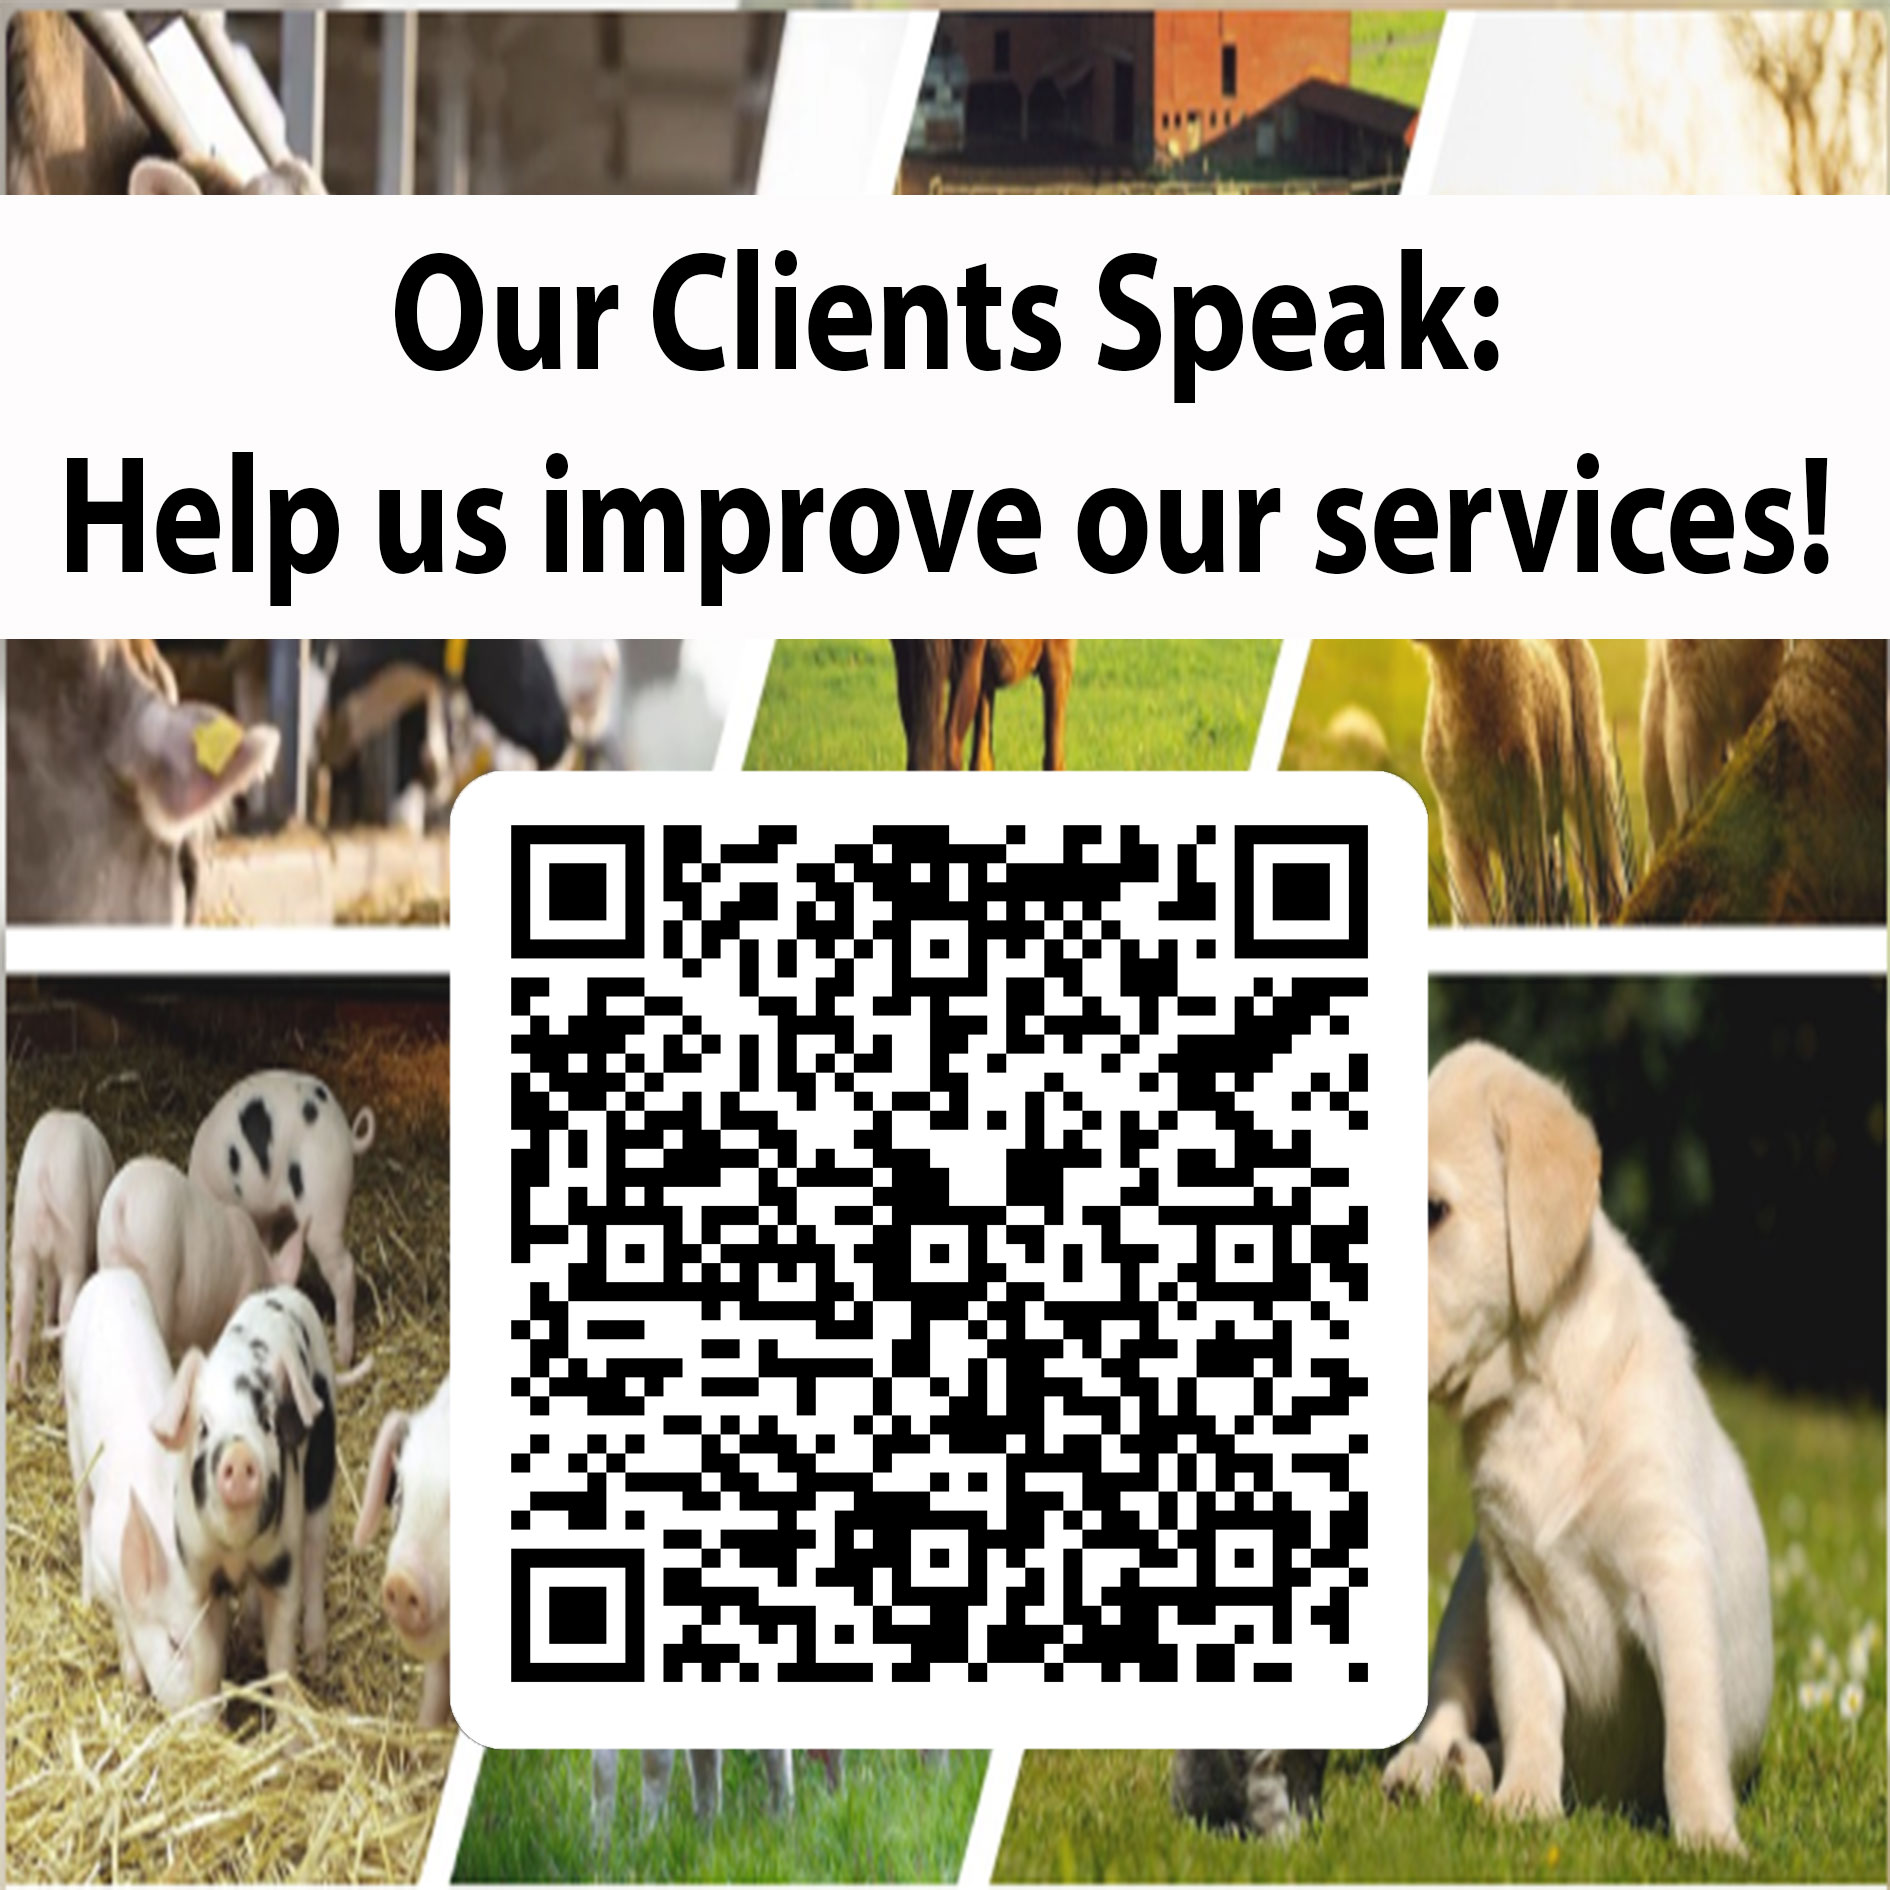 Help us improve our services. Link and QR code to survey